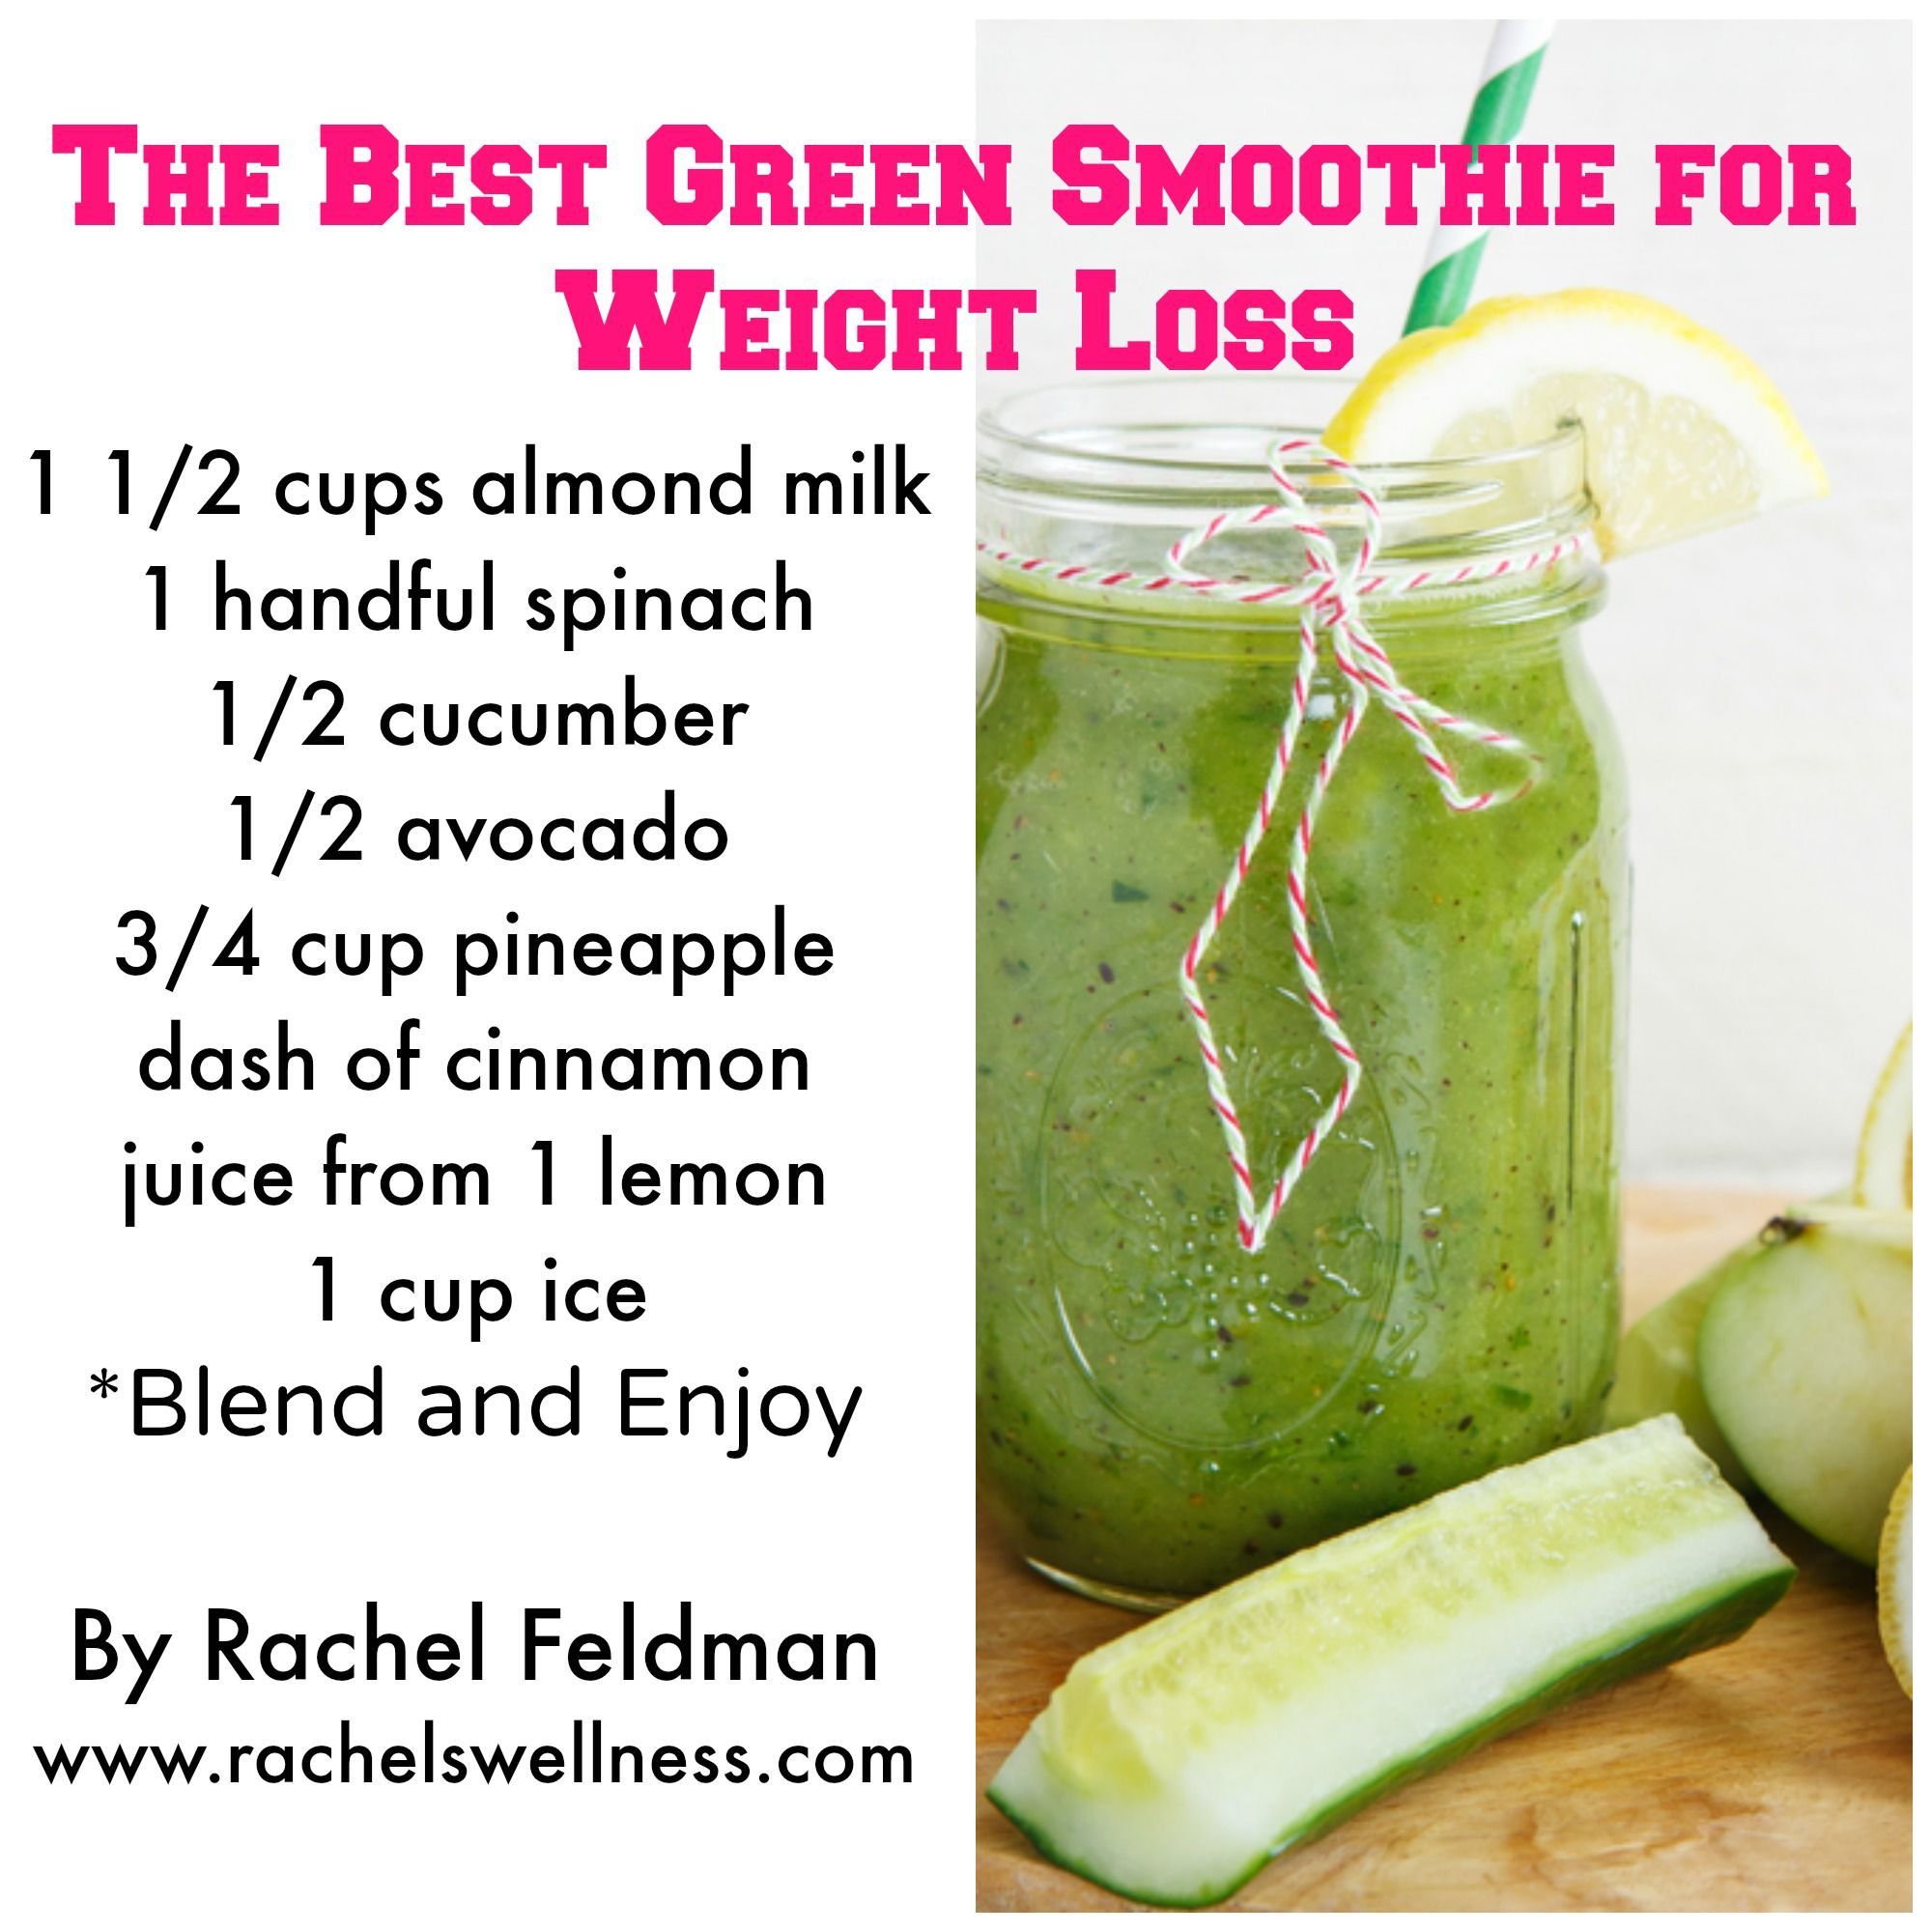 Free Healthy Smoothie Recipes For Weight Loss
 7 Healthy Green Smoothie Recipes For Weight Loss